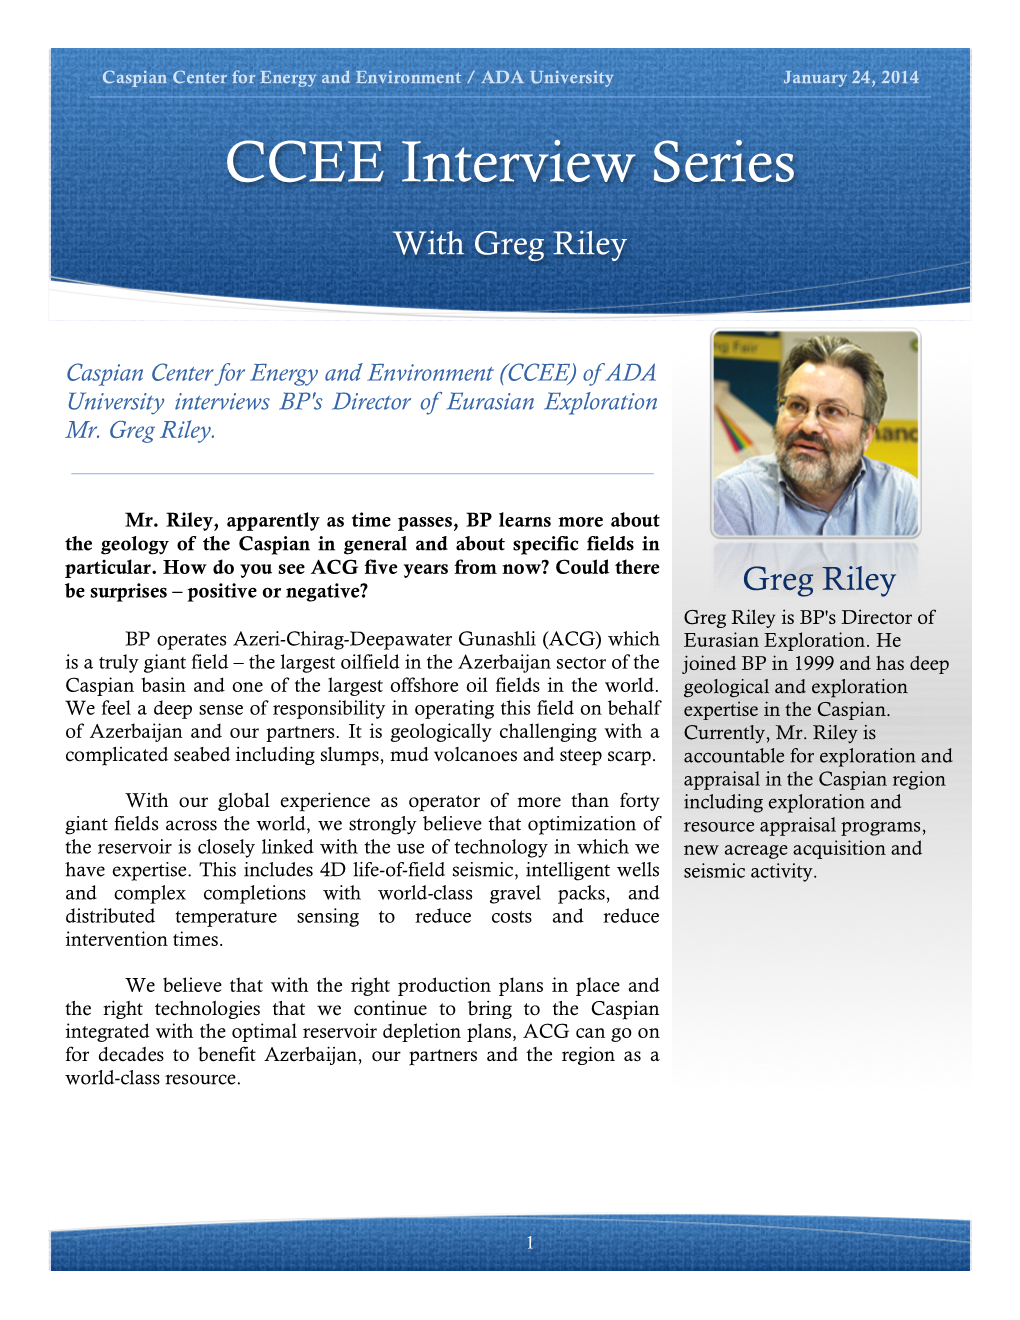 CCEE Interview Series